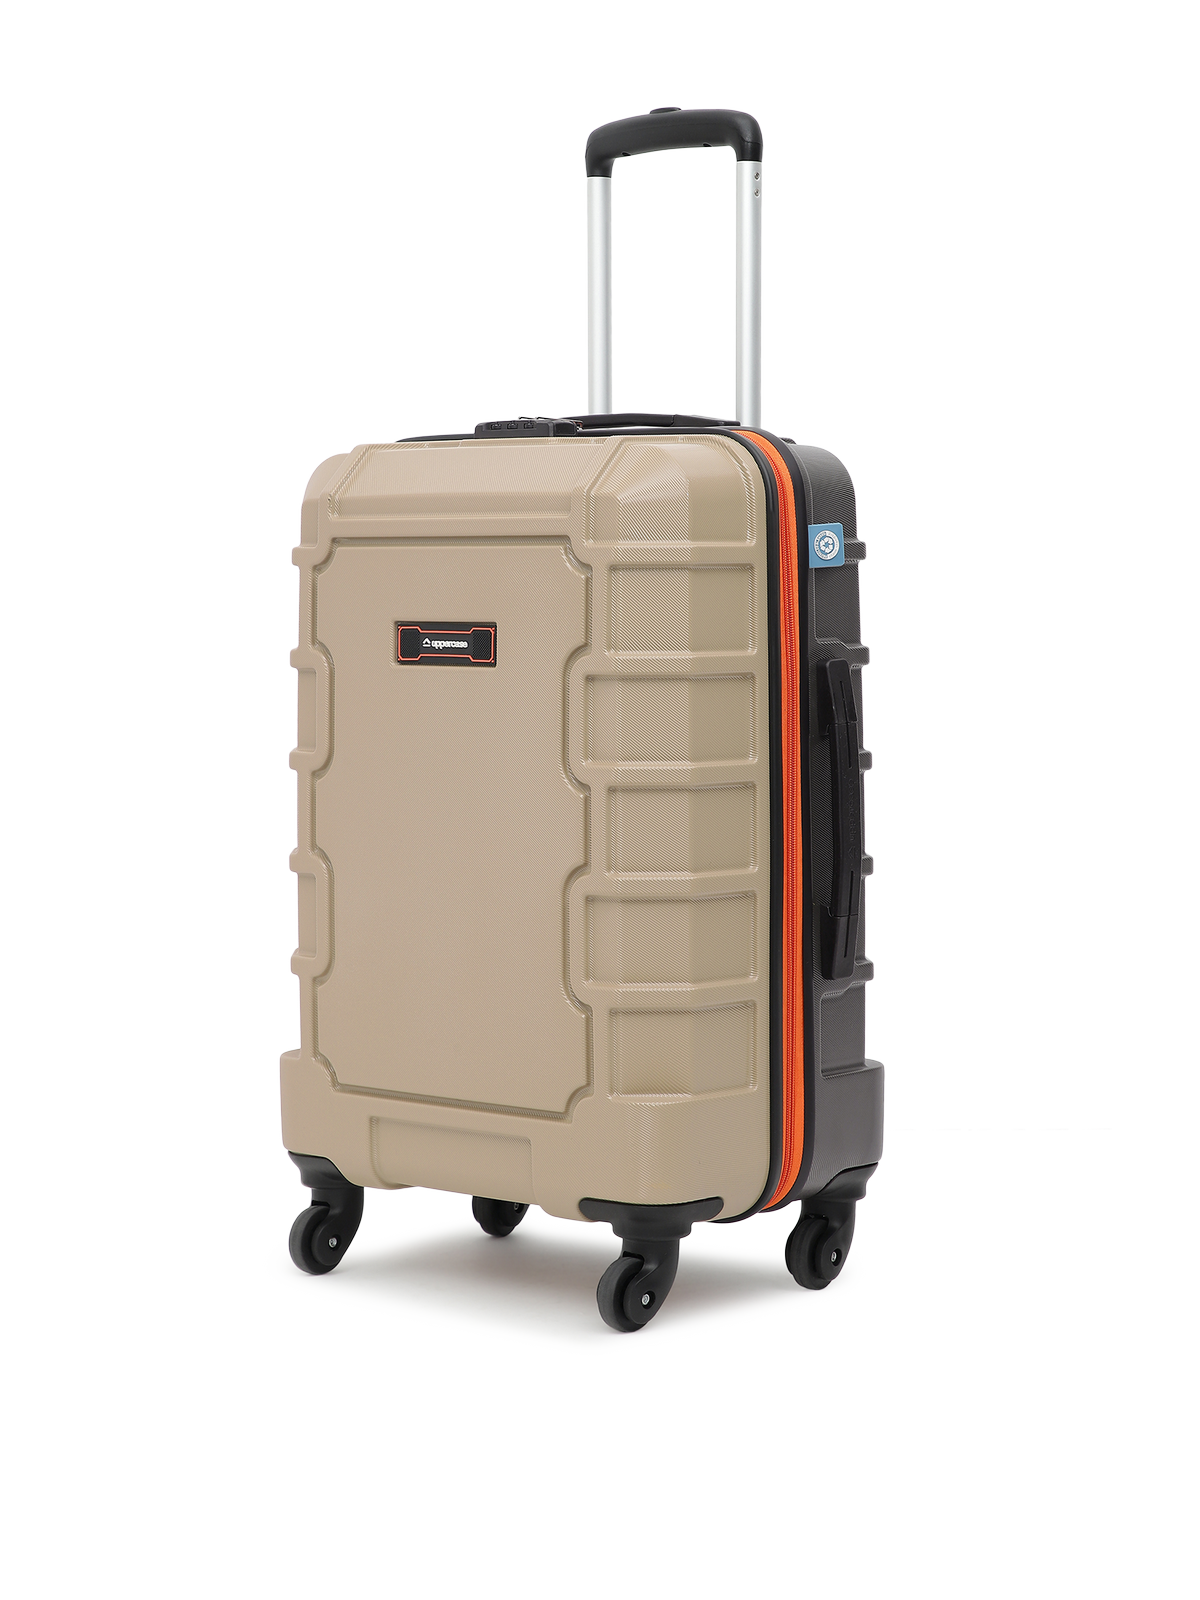 uppercase Arbor 66cm (Medium) | Check-in Trolley Bag | Sustainable Hardsided Luggage | Secure Combination Lock | Scratch Resistant | Mesh ConviPack | Suitcase for Men & Women | 2000 Days Warranty (Beige)